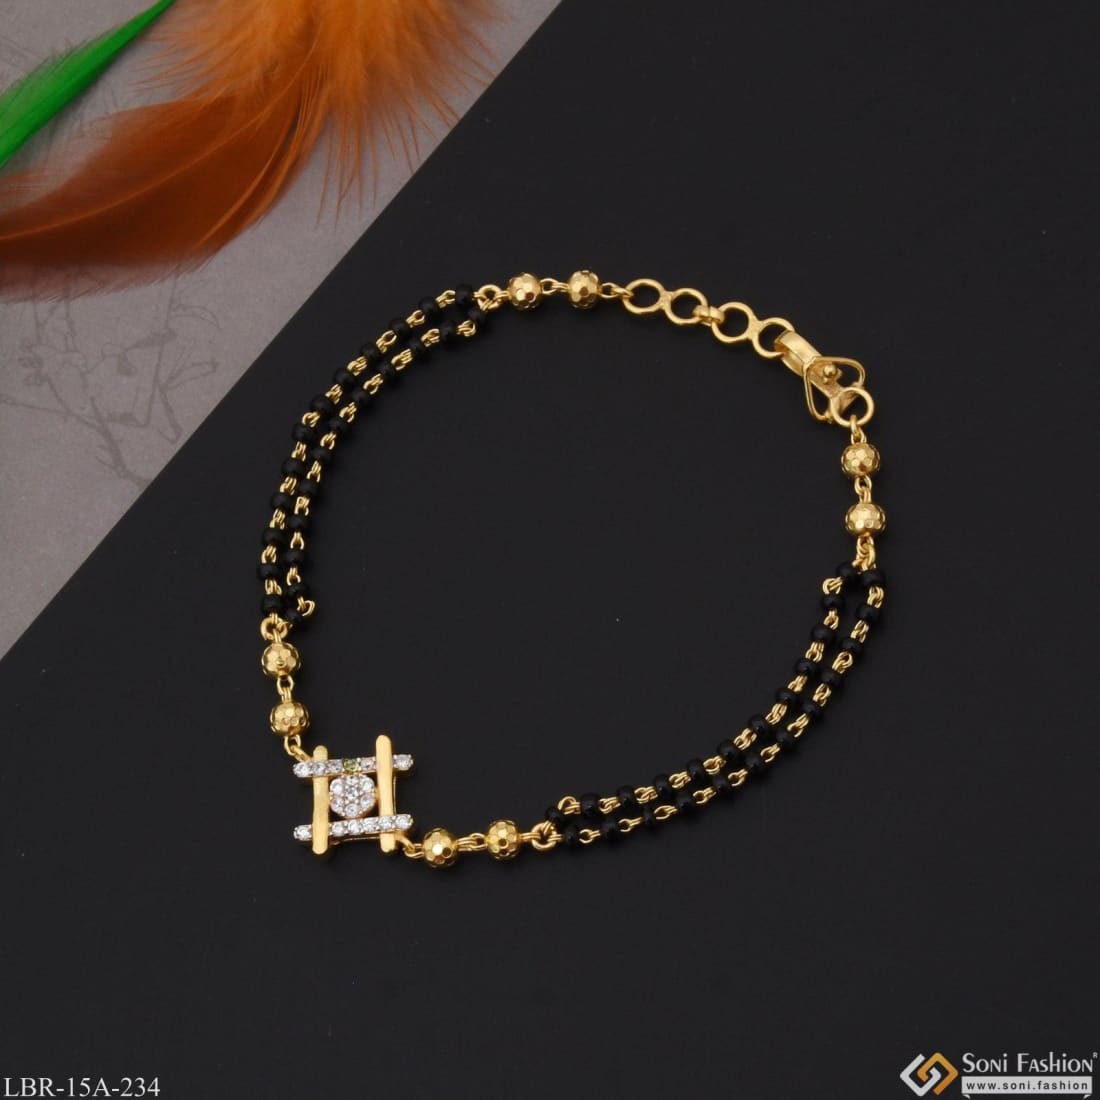 theostrichcollection Alloy Beads Gold-plated Bracelet Price in India - Buy  theostrichcollection Alloy Beads Gold-plated Bracelet Online at Best Prices  in India | Flipkart.com